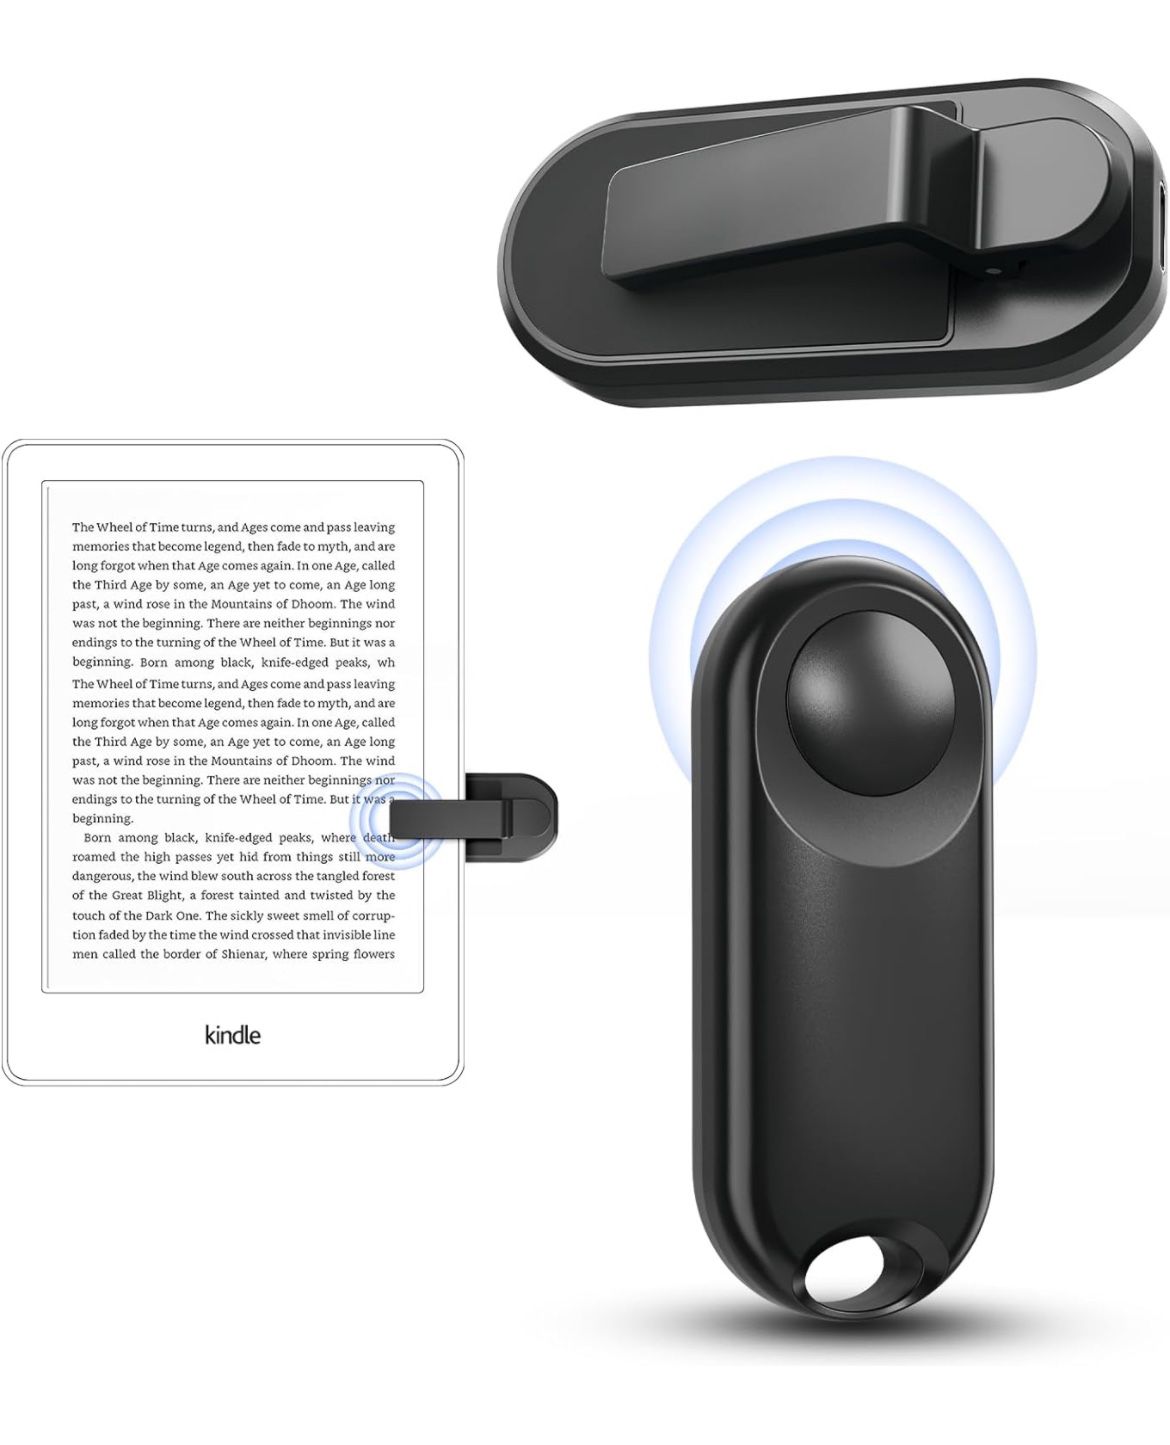 Page Turner for Kindle Remote Control Page Turner Clicker for Kindle Paperwhite Oasis Kobo E-Book eReaders Reading Novels Kindle Accessories with Wris